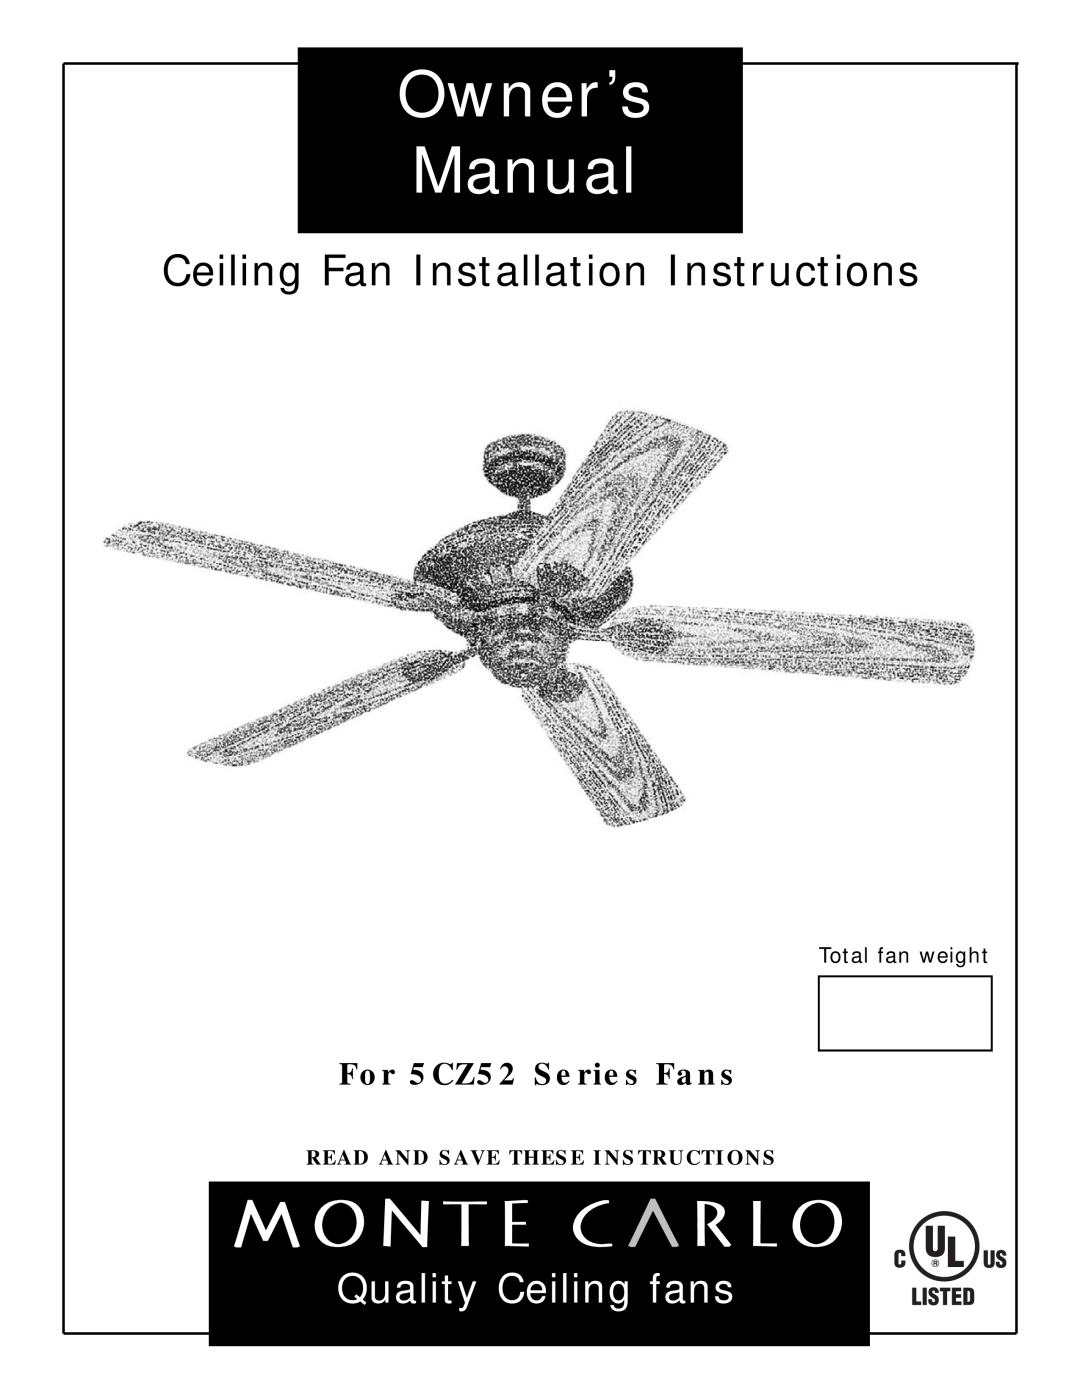 Monte Carlo Fan Company owner manual For 5CZ52 Series Fans, Total fan weight, Read And Save These Instructions 